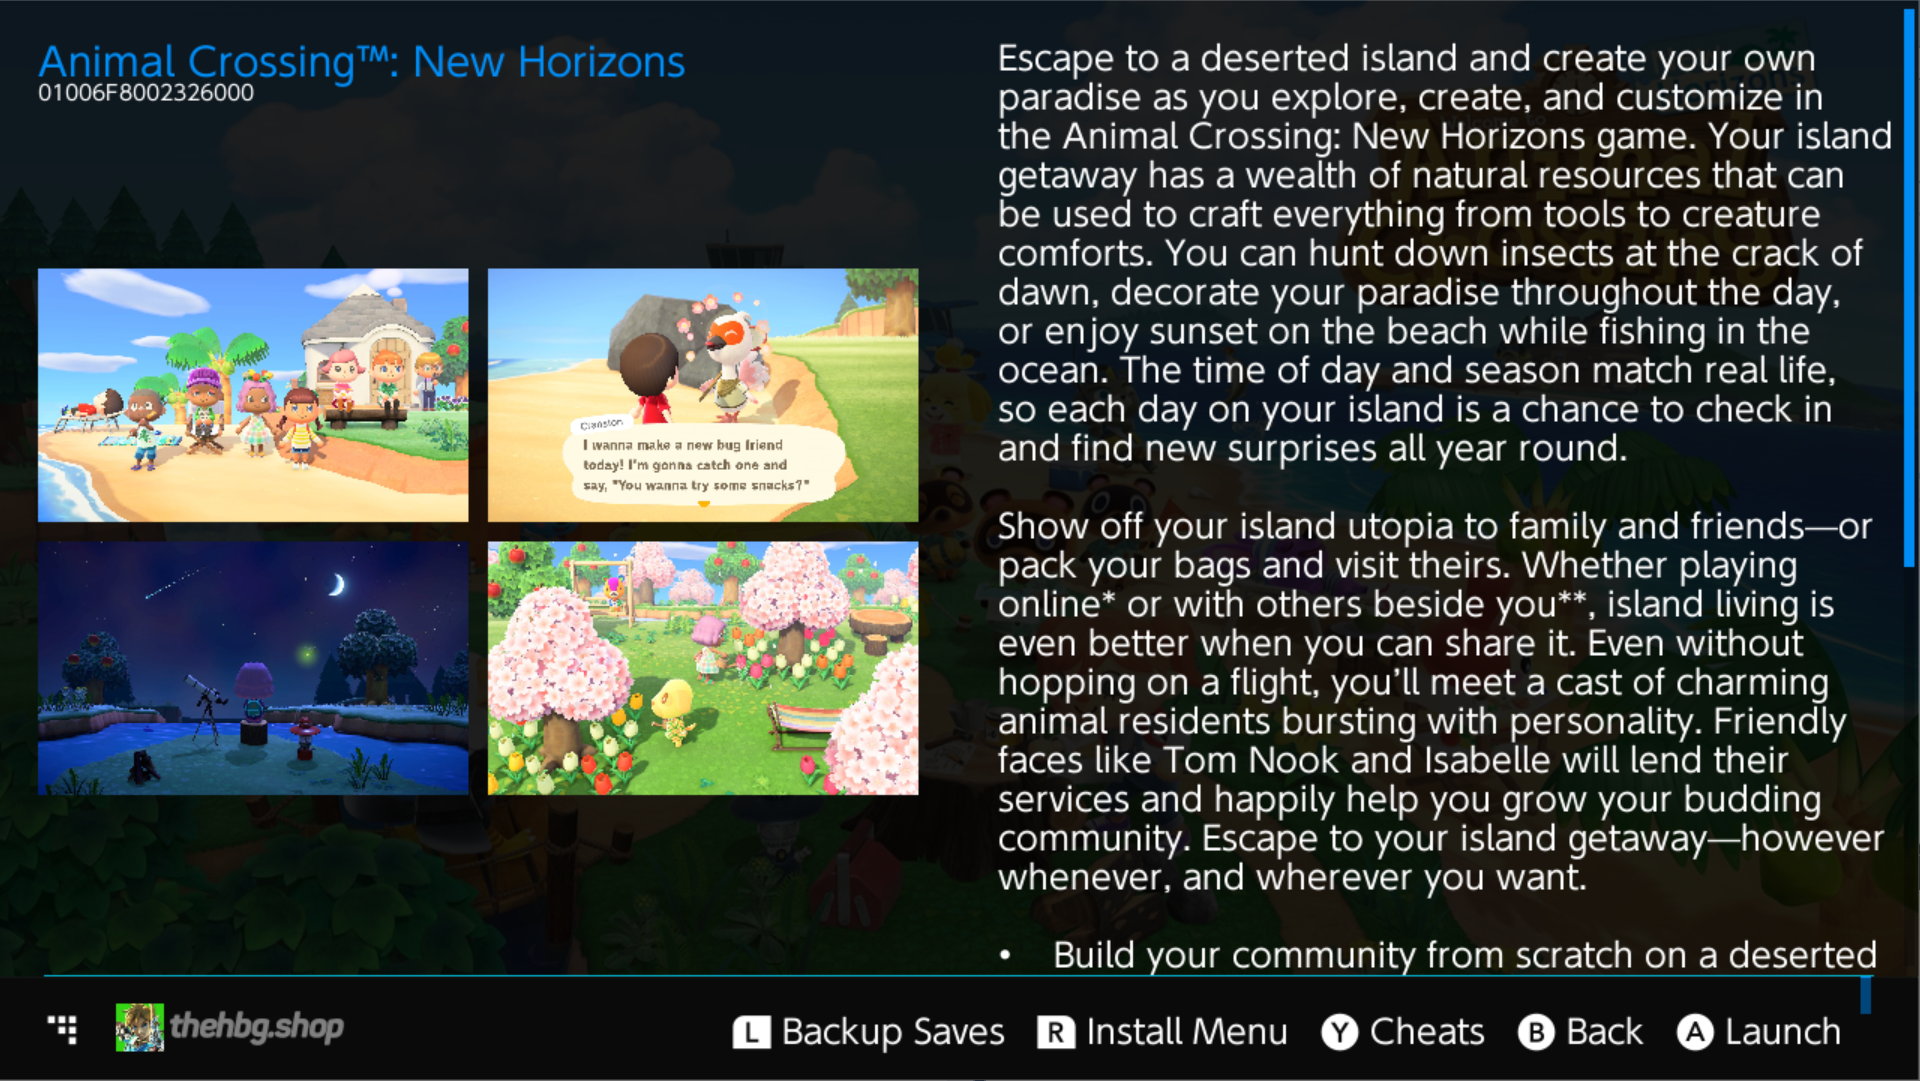 How to cheat in Animal Crossing: New Horizons (easy way) and have multiple  islands | GBAtemp.net - The Independent Video Game Community